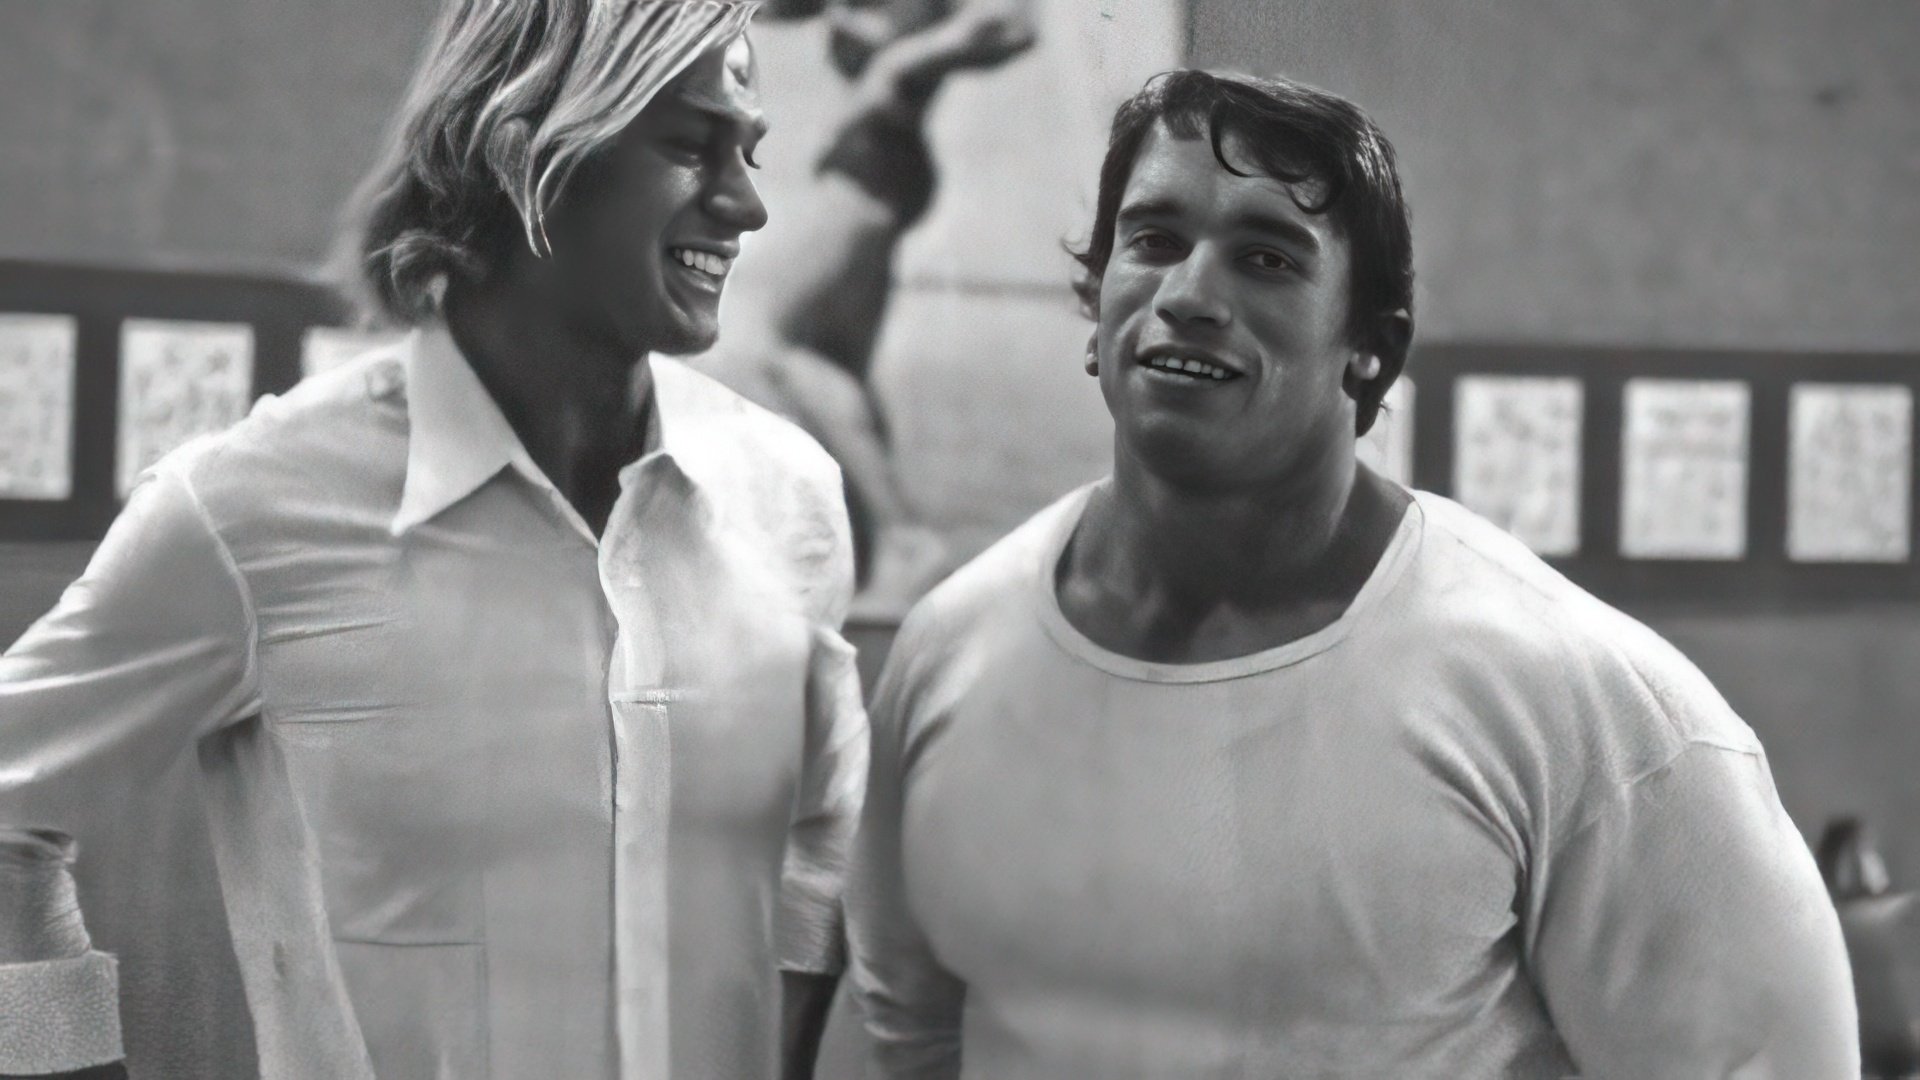 Schwarzenegger's brother Meinhard (left) died in a car accident